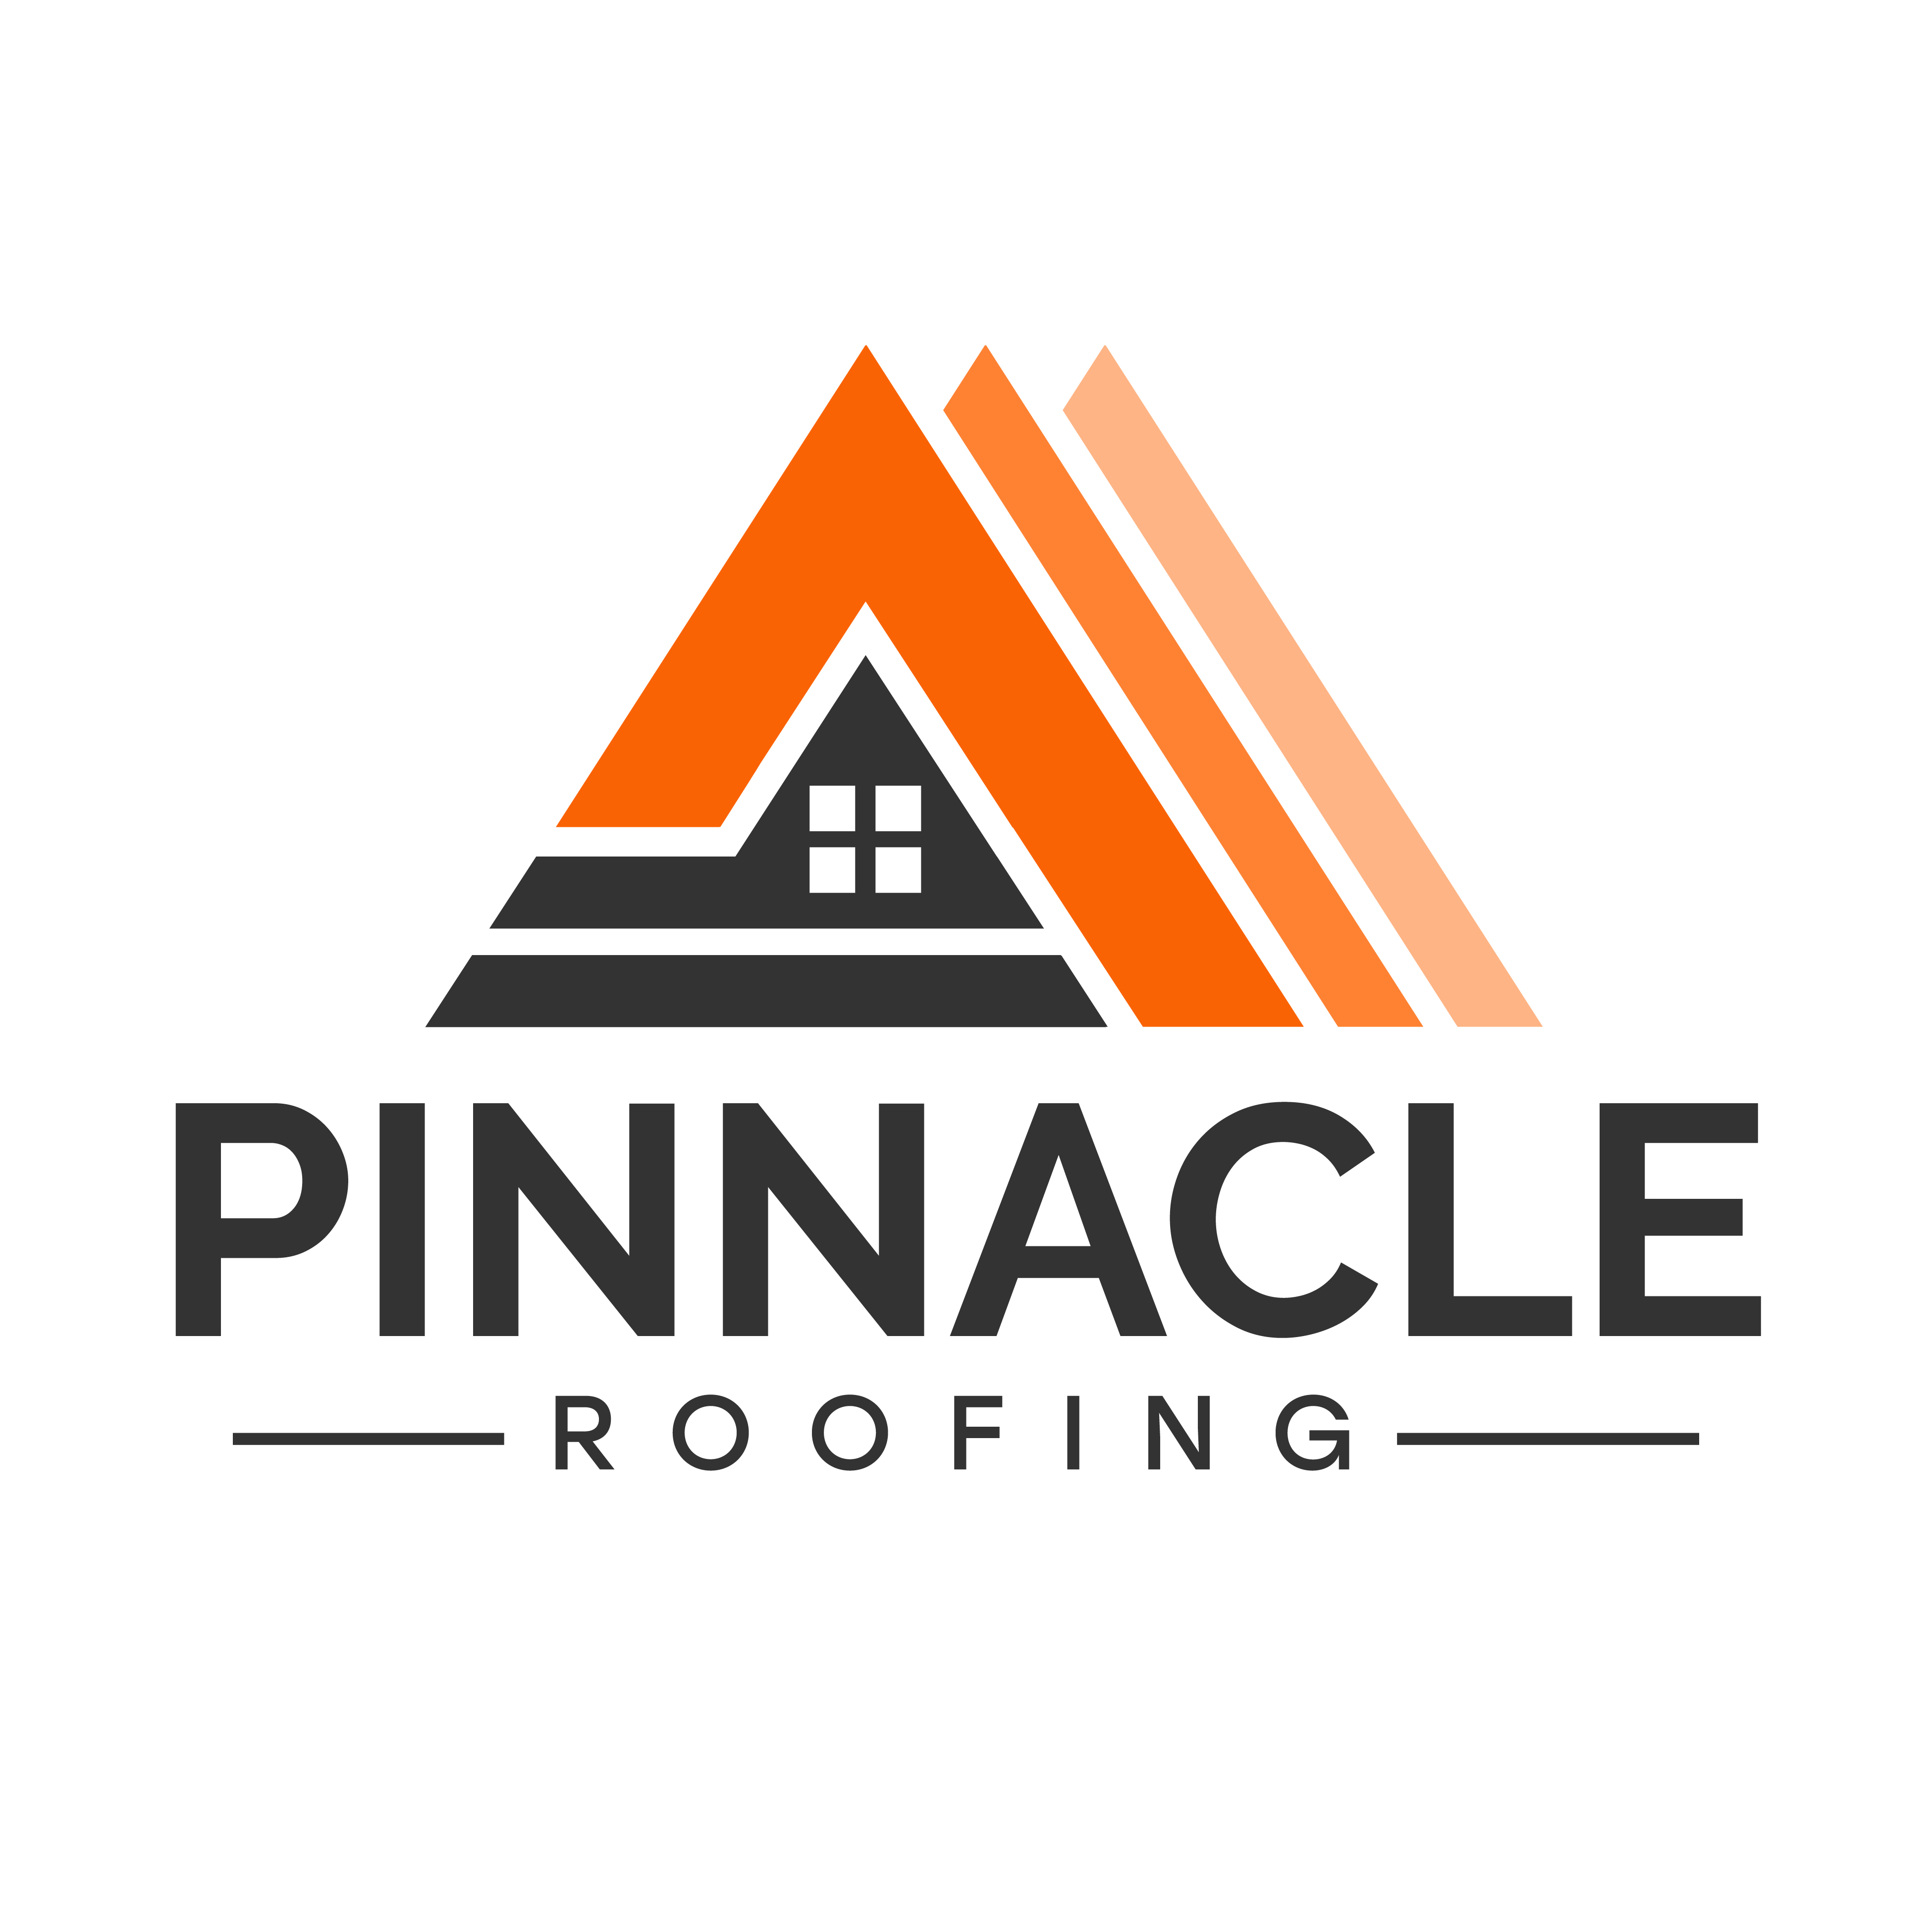 Pinnacle Roofing Company Copperas Cove Is Currently Amongst the Leading Roof Pros in Copperas Cove, TX